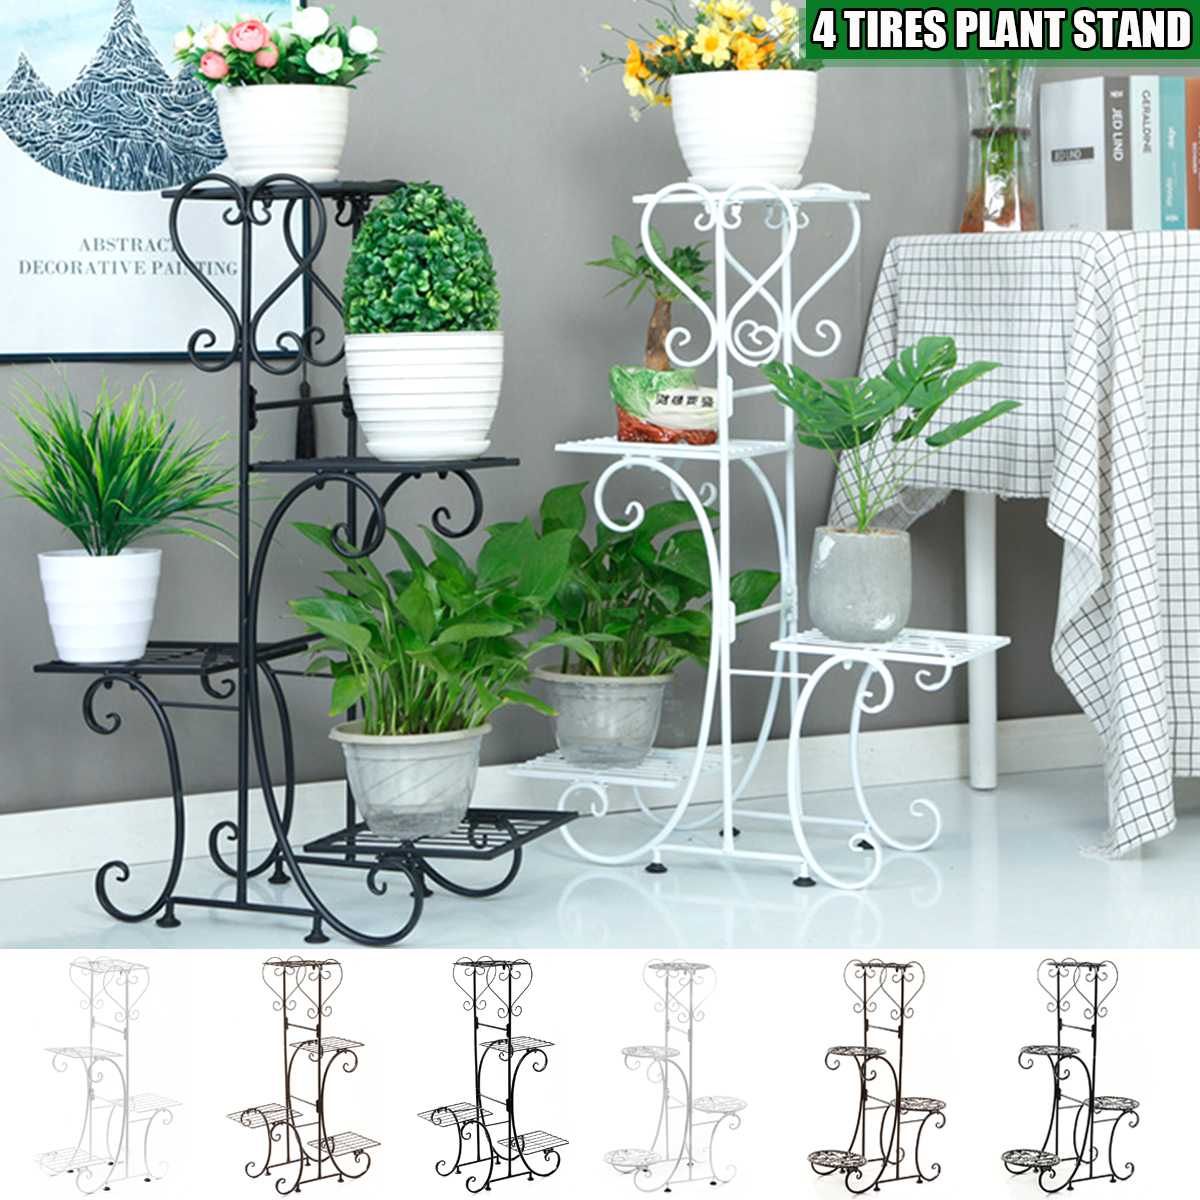 4 Tier Metal Plant Stand Holder Flower Pot Holder Shelves Display Rack Home  Decor Garden Balcony Flower Storage Rack – Plant Shelves – Aliexpress Inside Four Tier Metal Plant Stands (View 9 of 15)